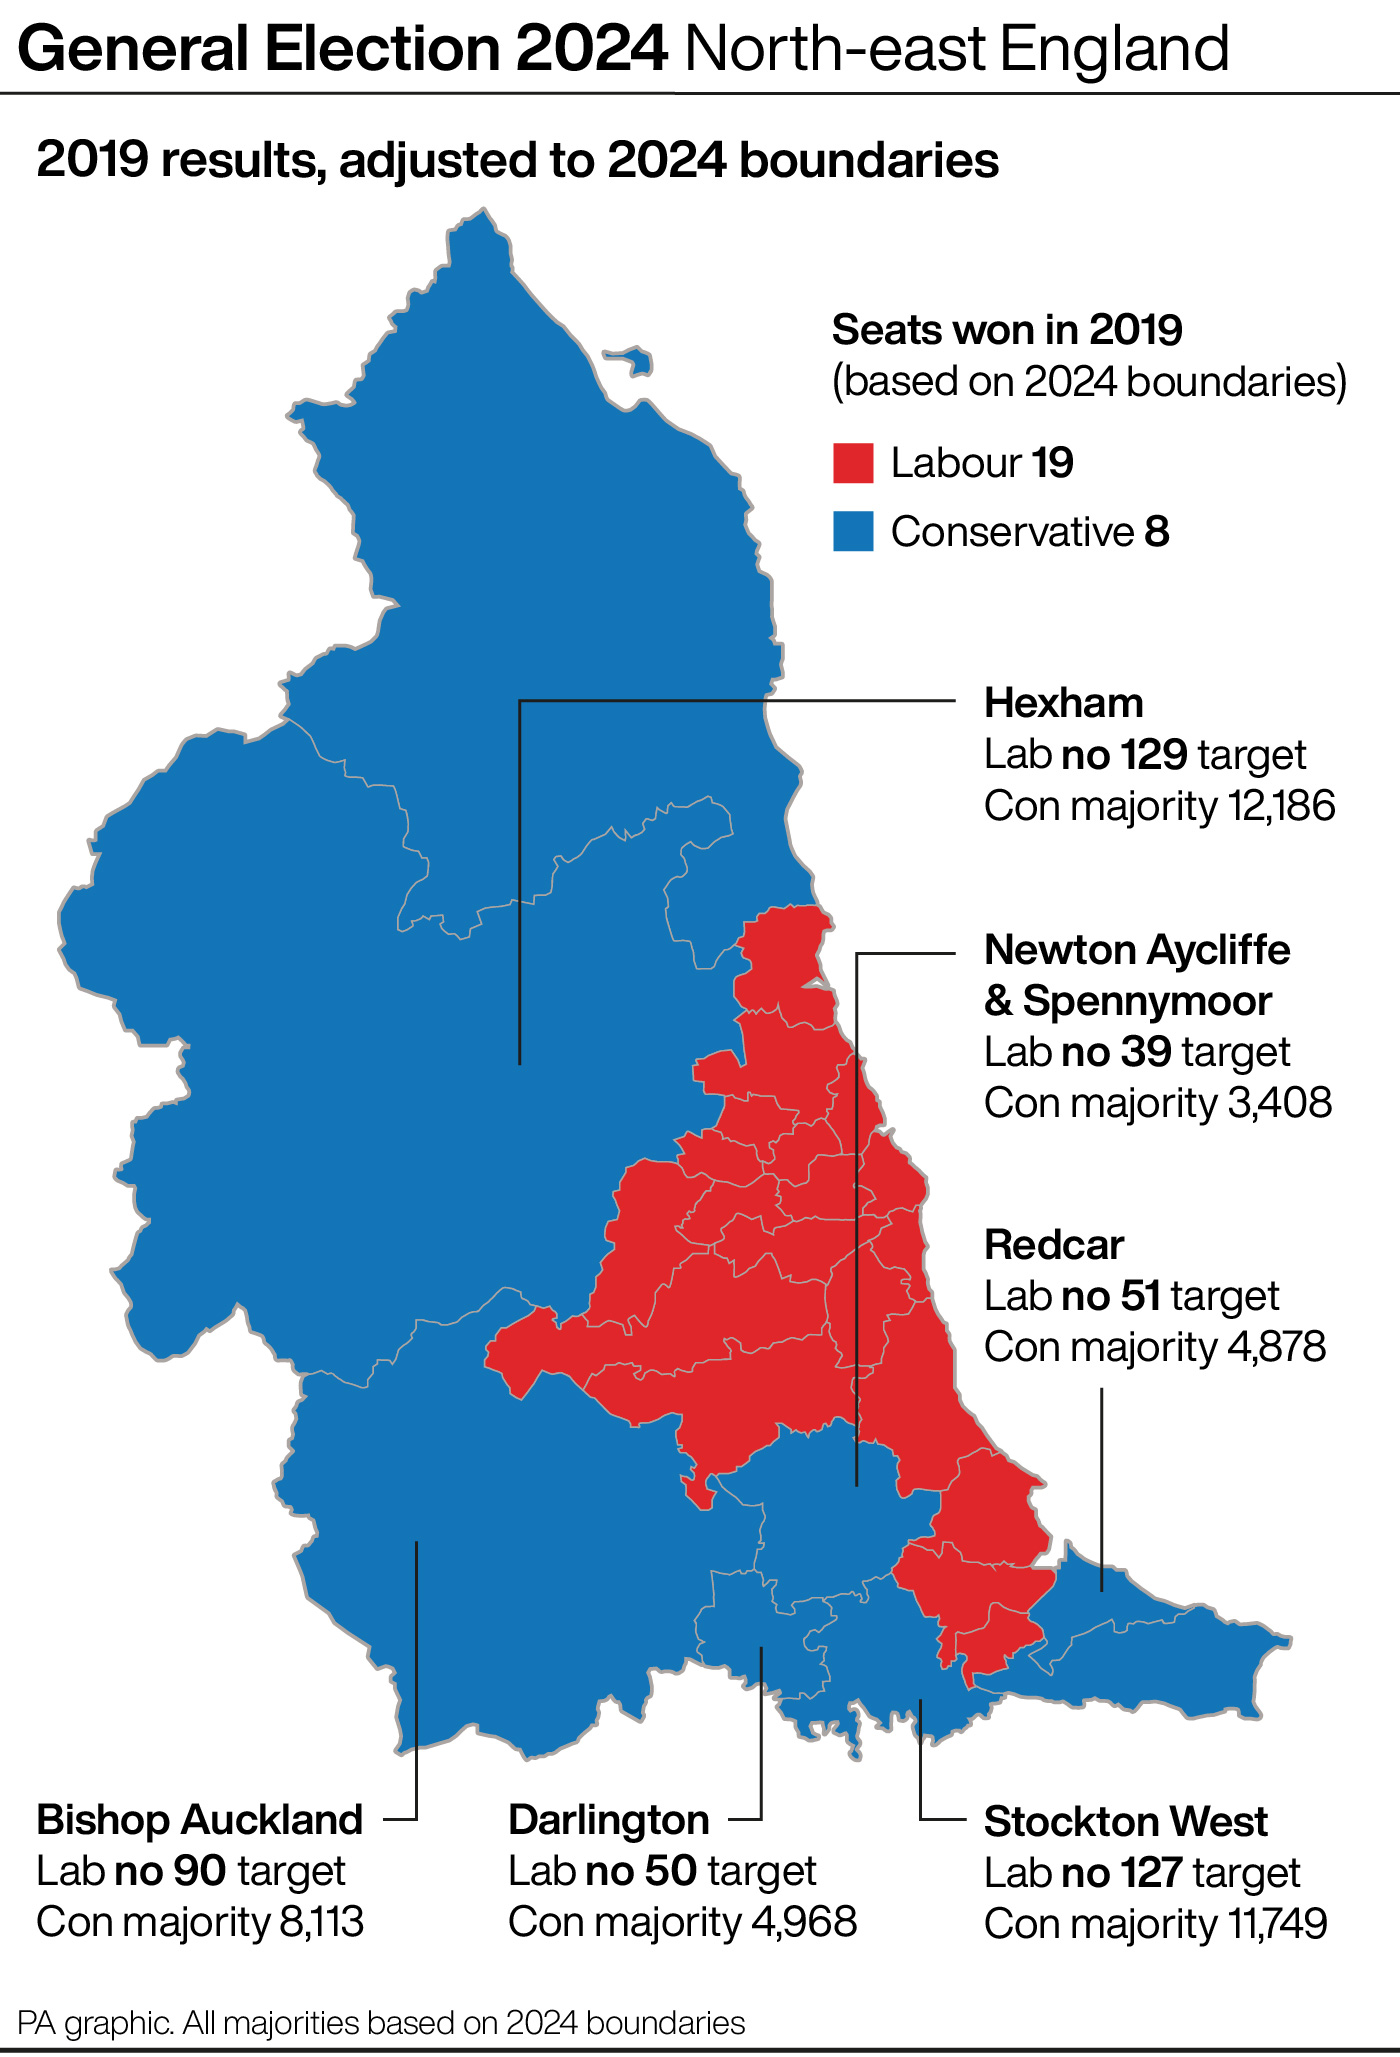 A map of key battleground seats in north-east England at the General Election